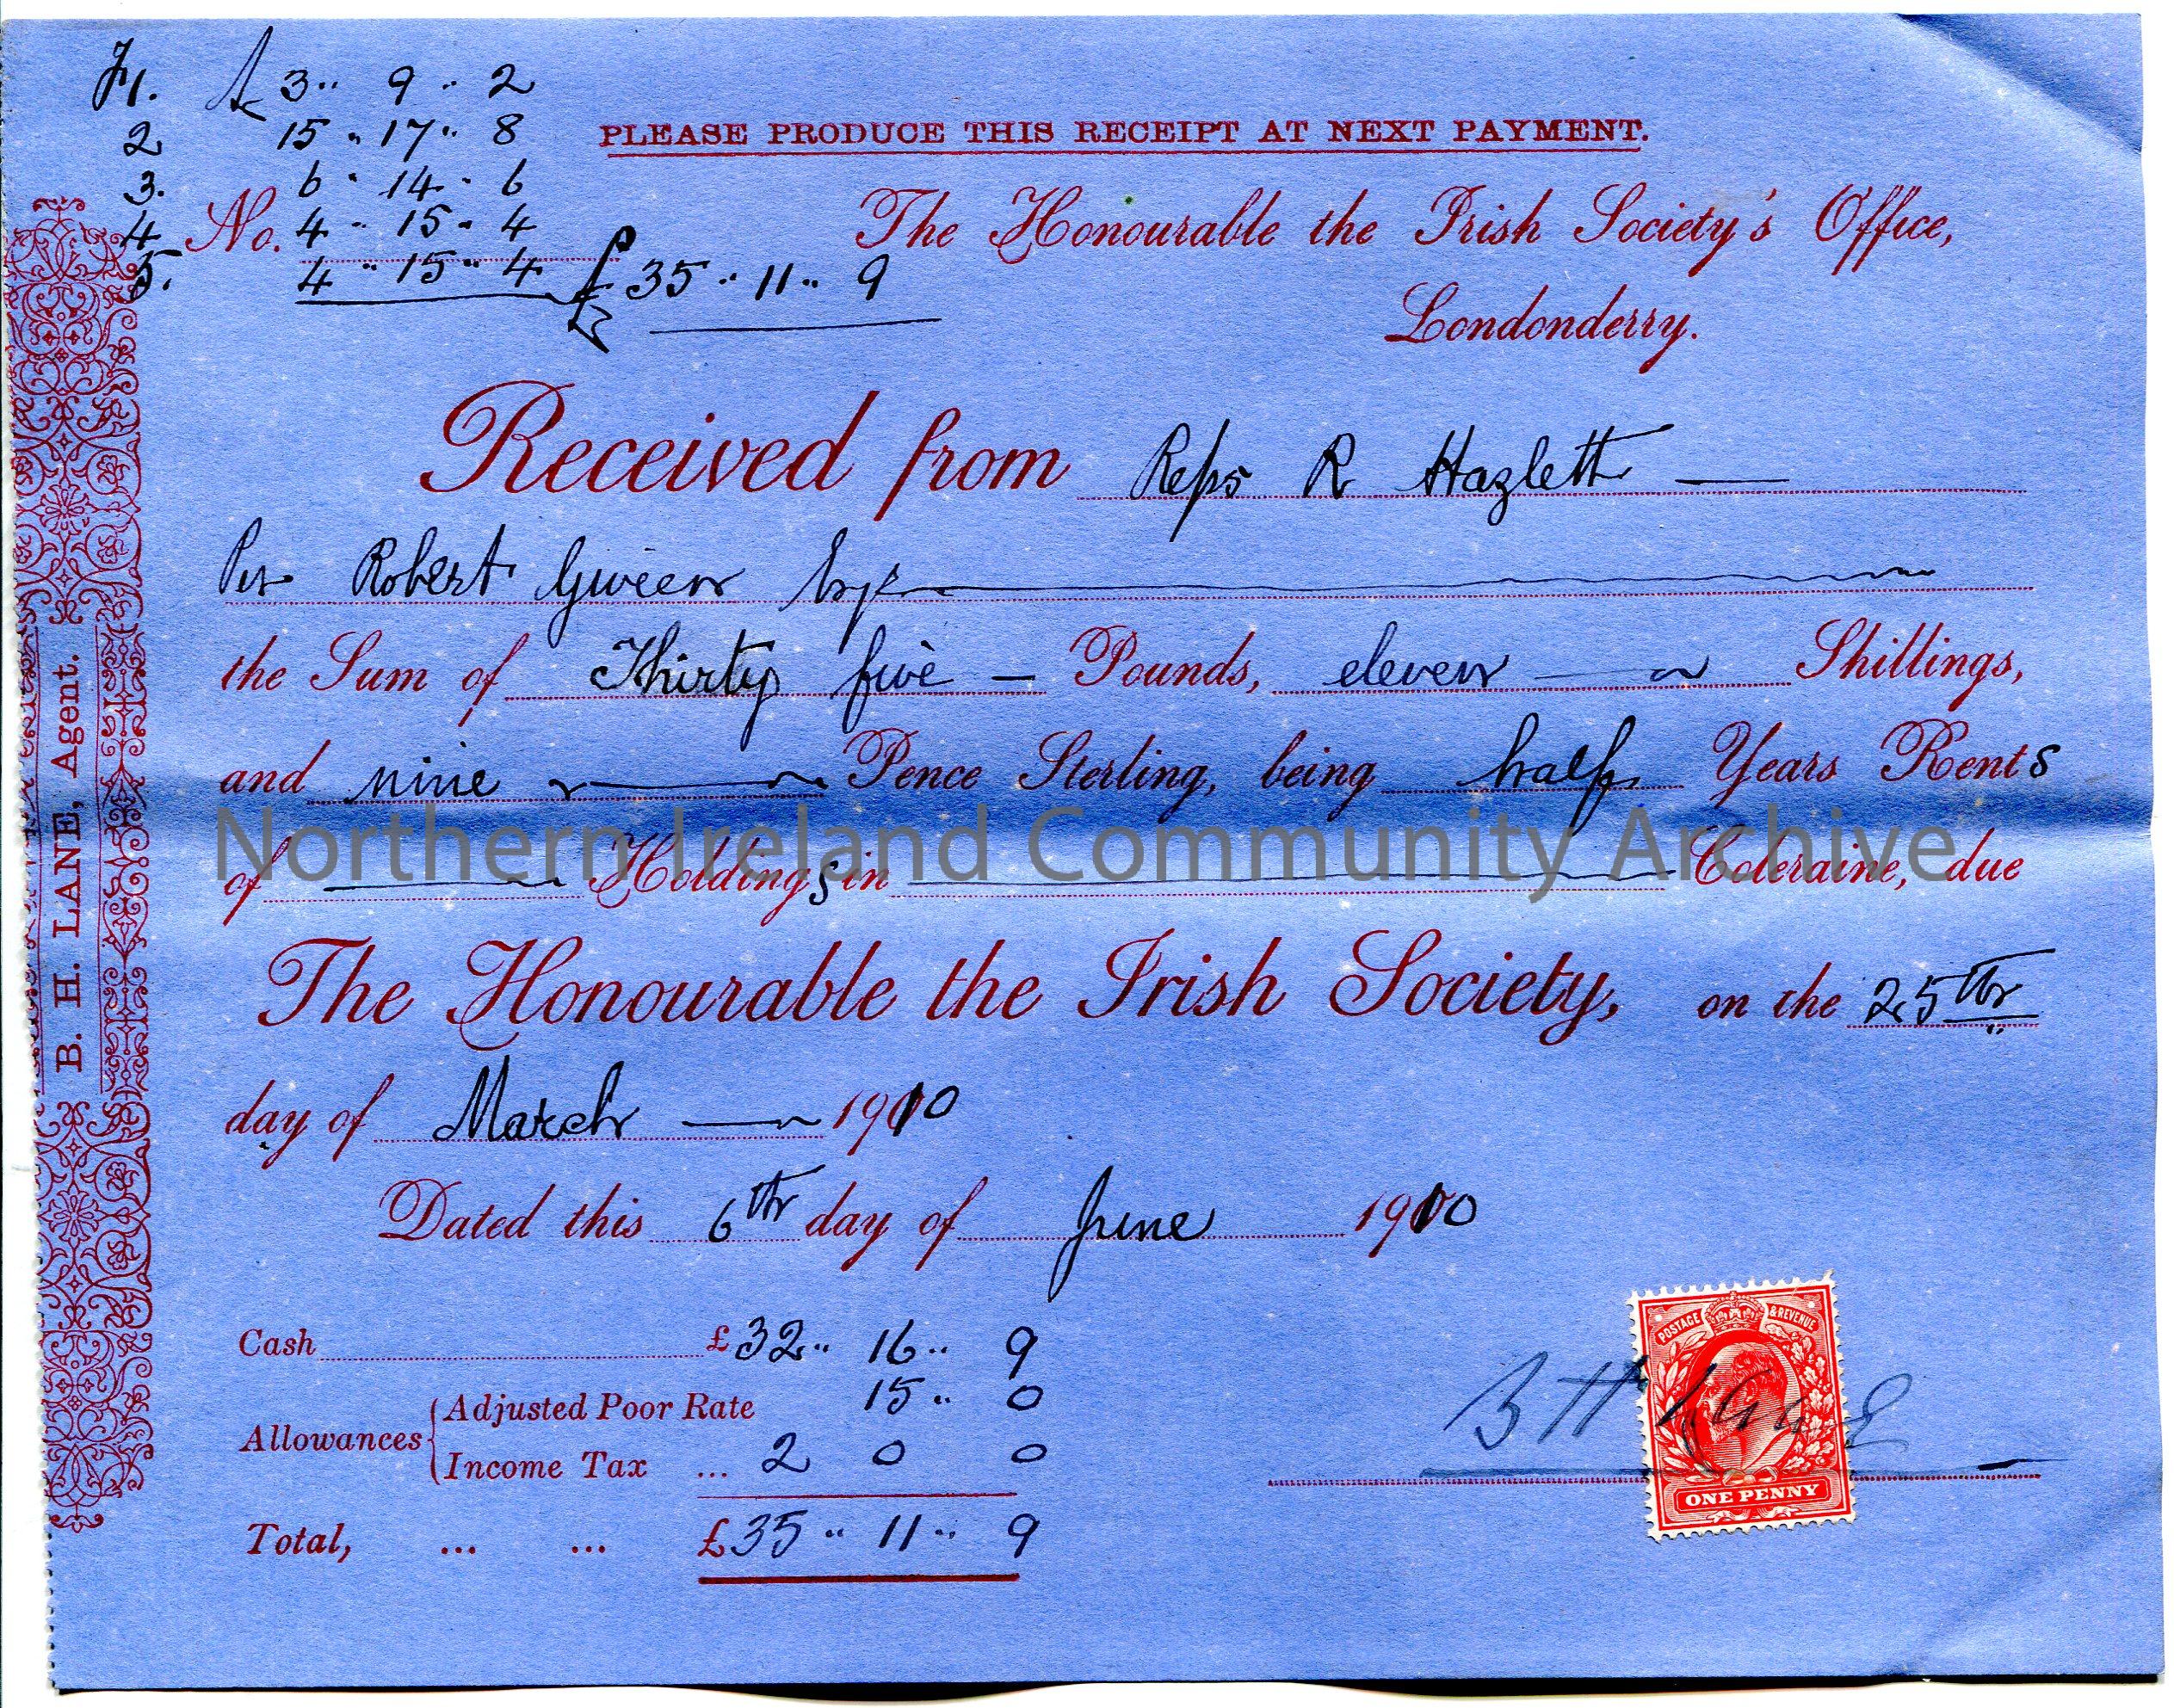 Handwritten receipt (blue paper) for payment from R Hazlett [Hezlet] per Robert Giveen to The Honourable the Irish Society for the sum of £35.11….